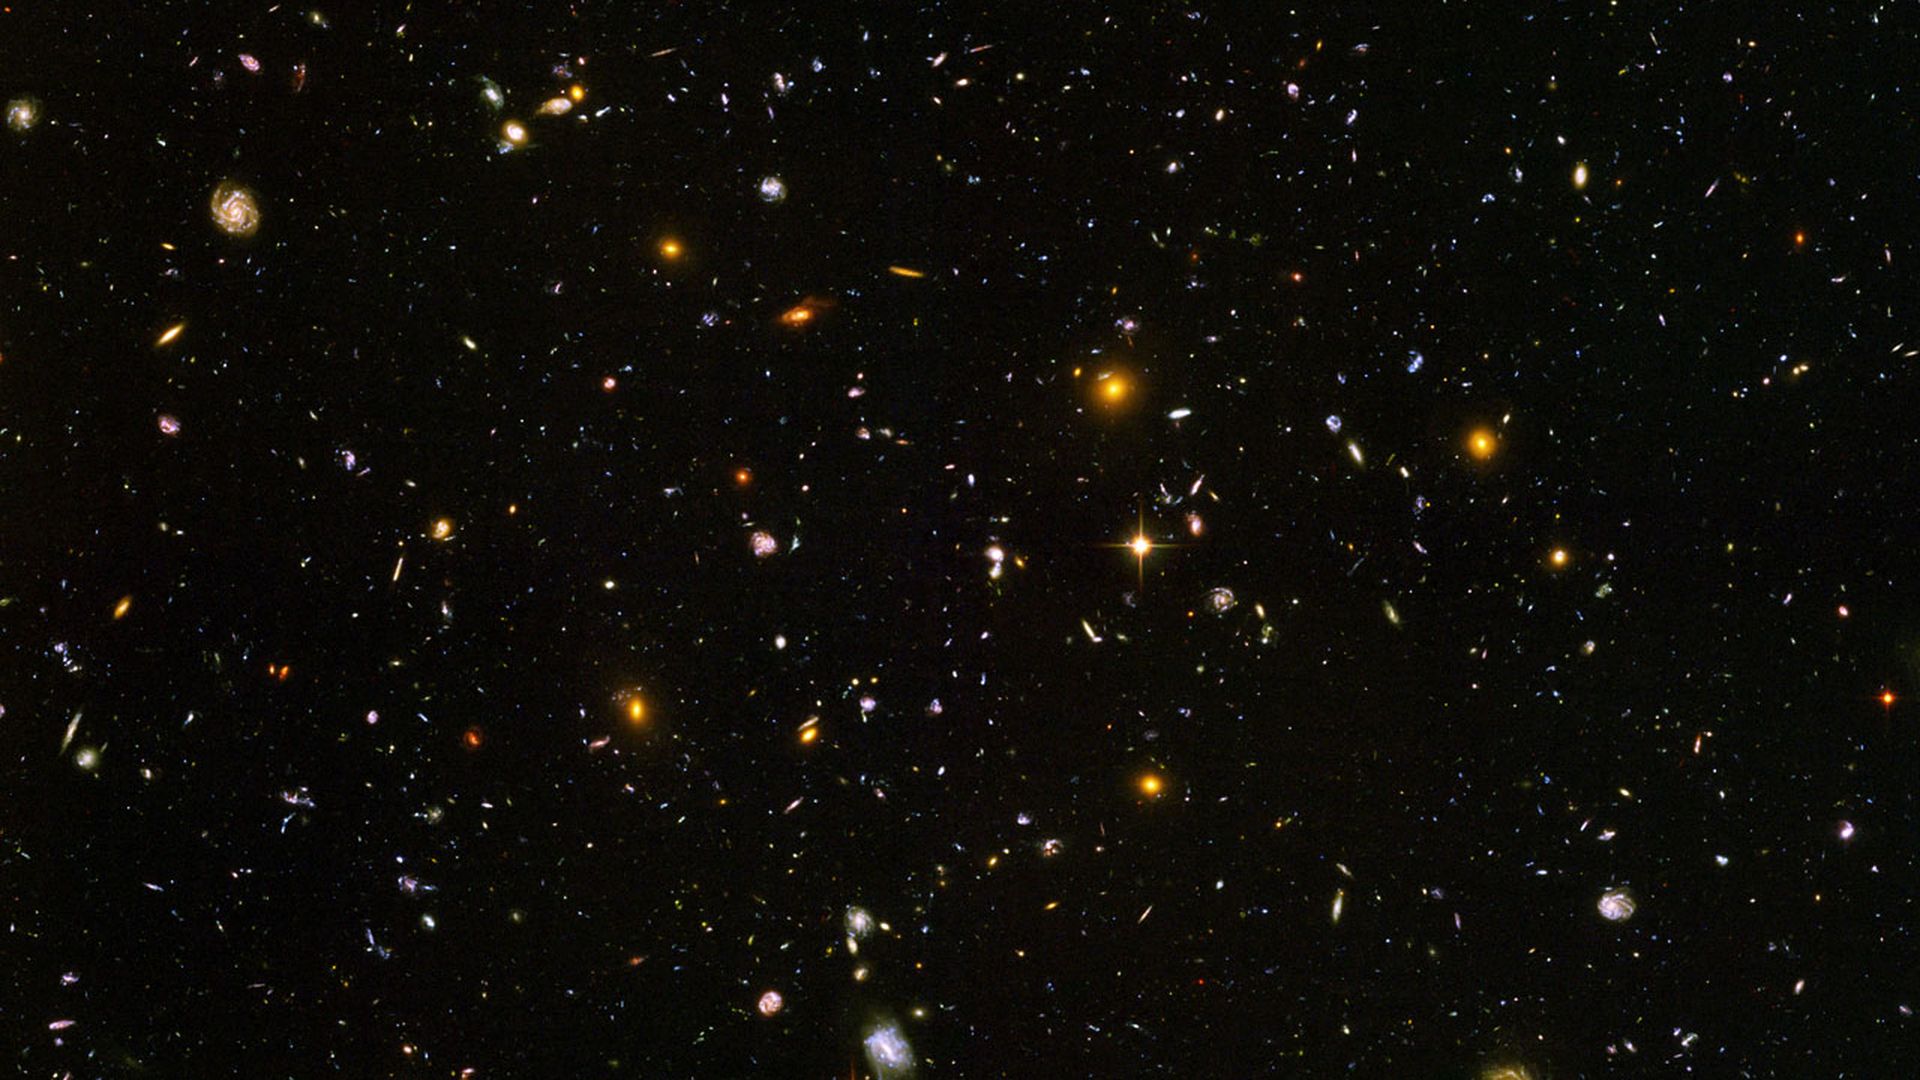 Nearly 10,000 galaxies seen by the Hubble Space Telescope